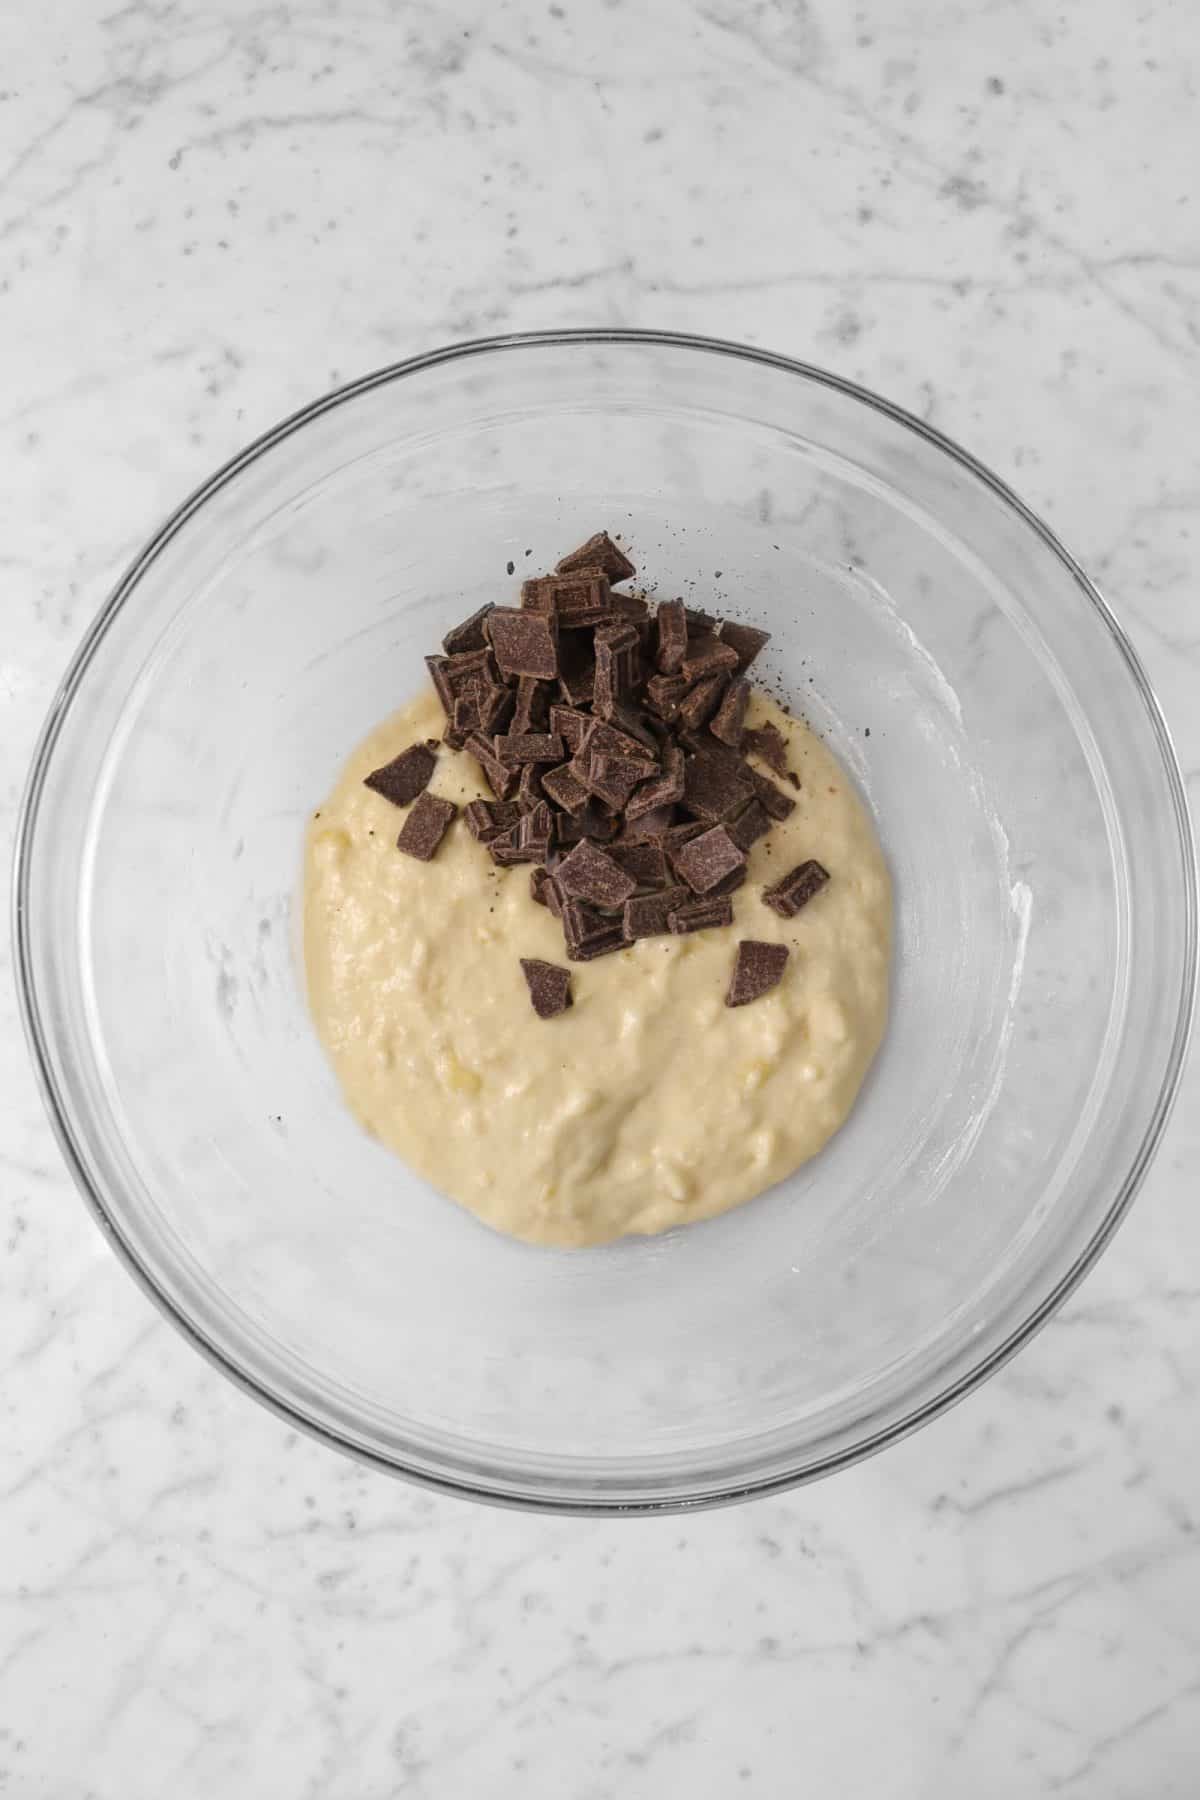 chocolate chunks added to muffin batter